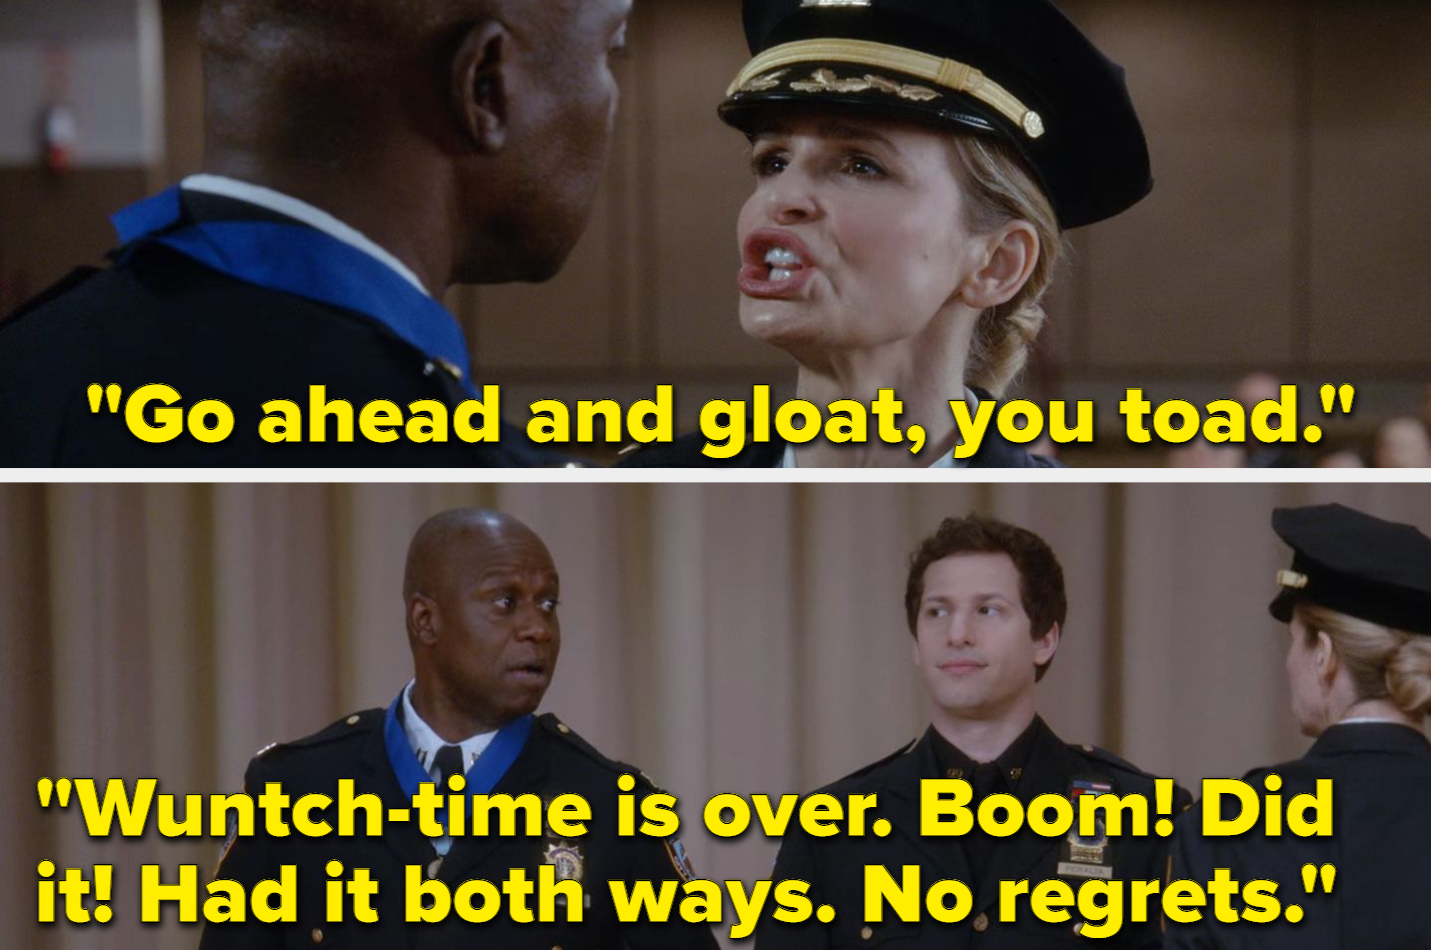 Captain Holt and Madeline Wuntch trying to insult each other